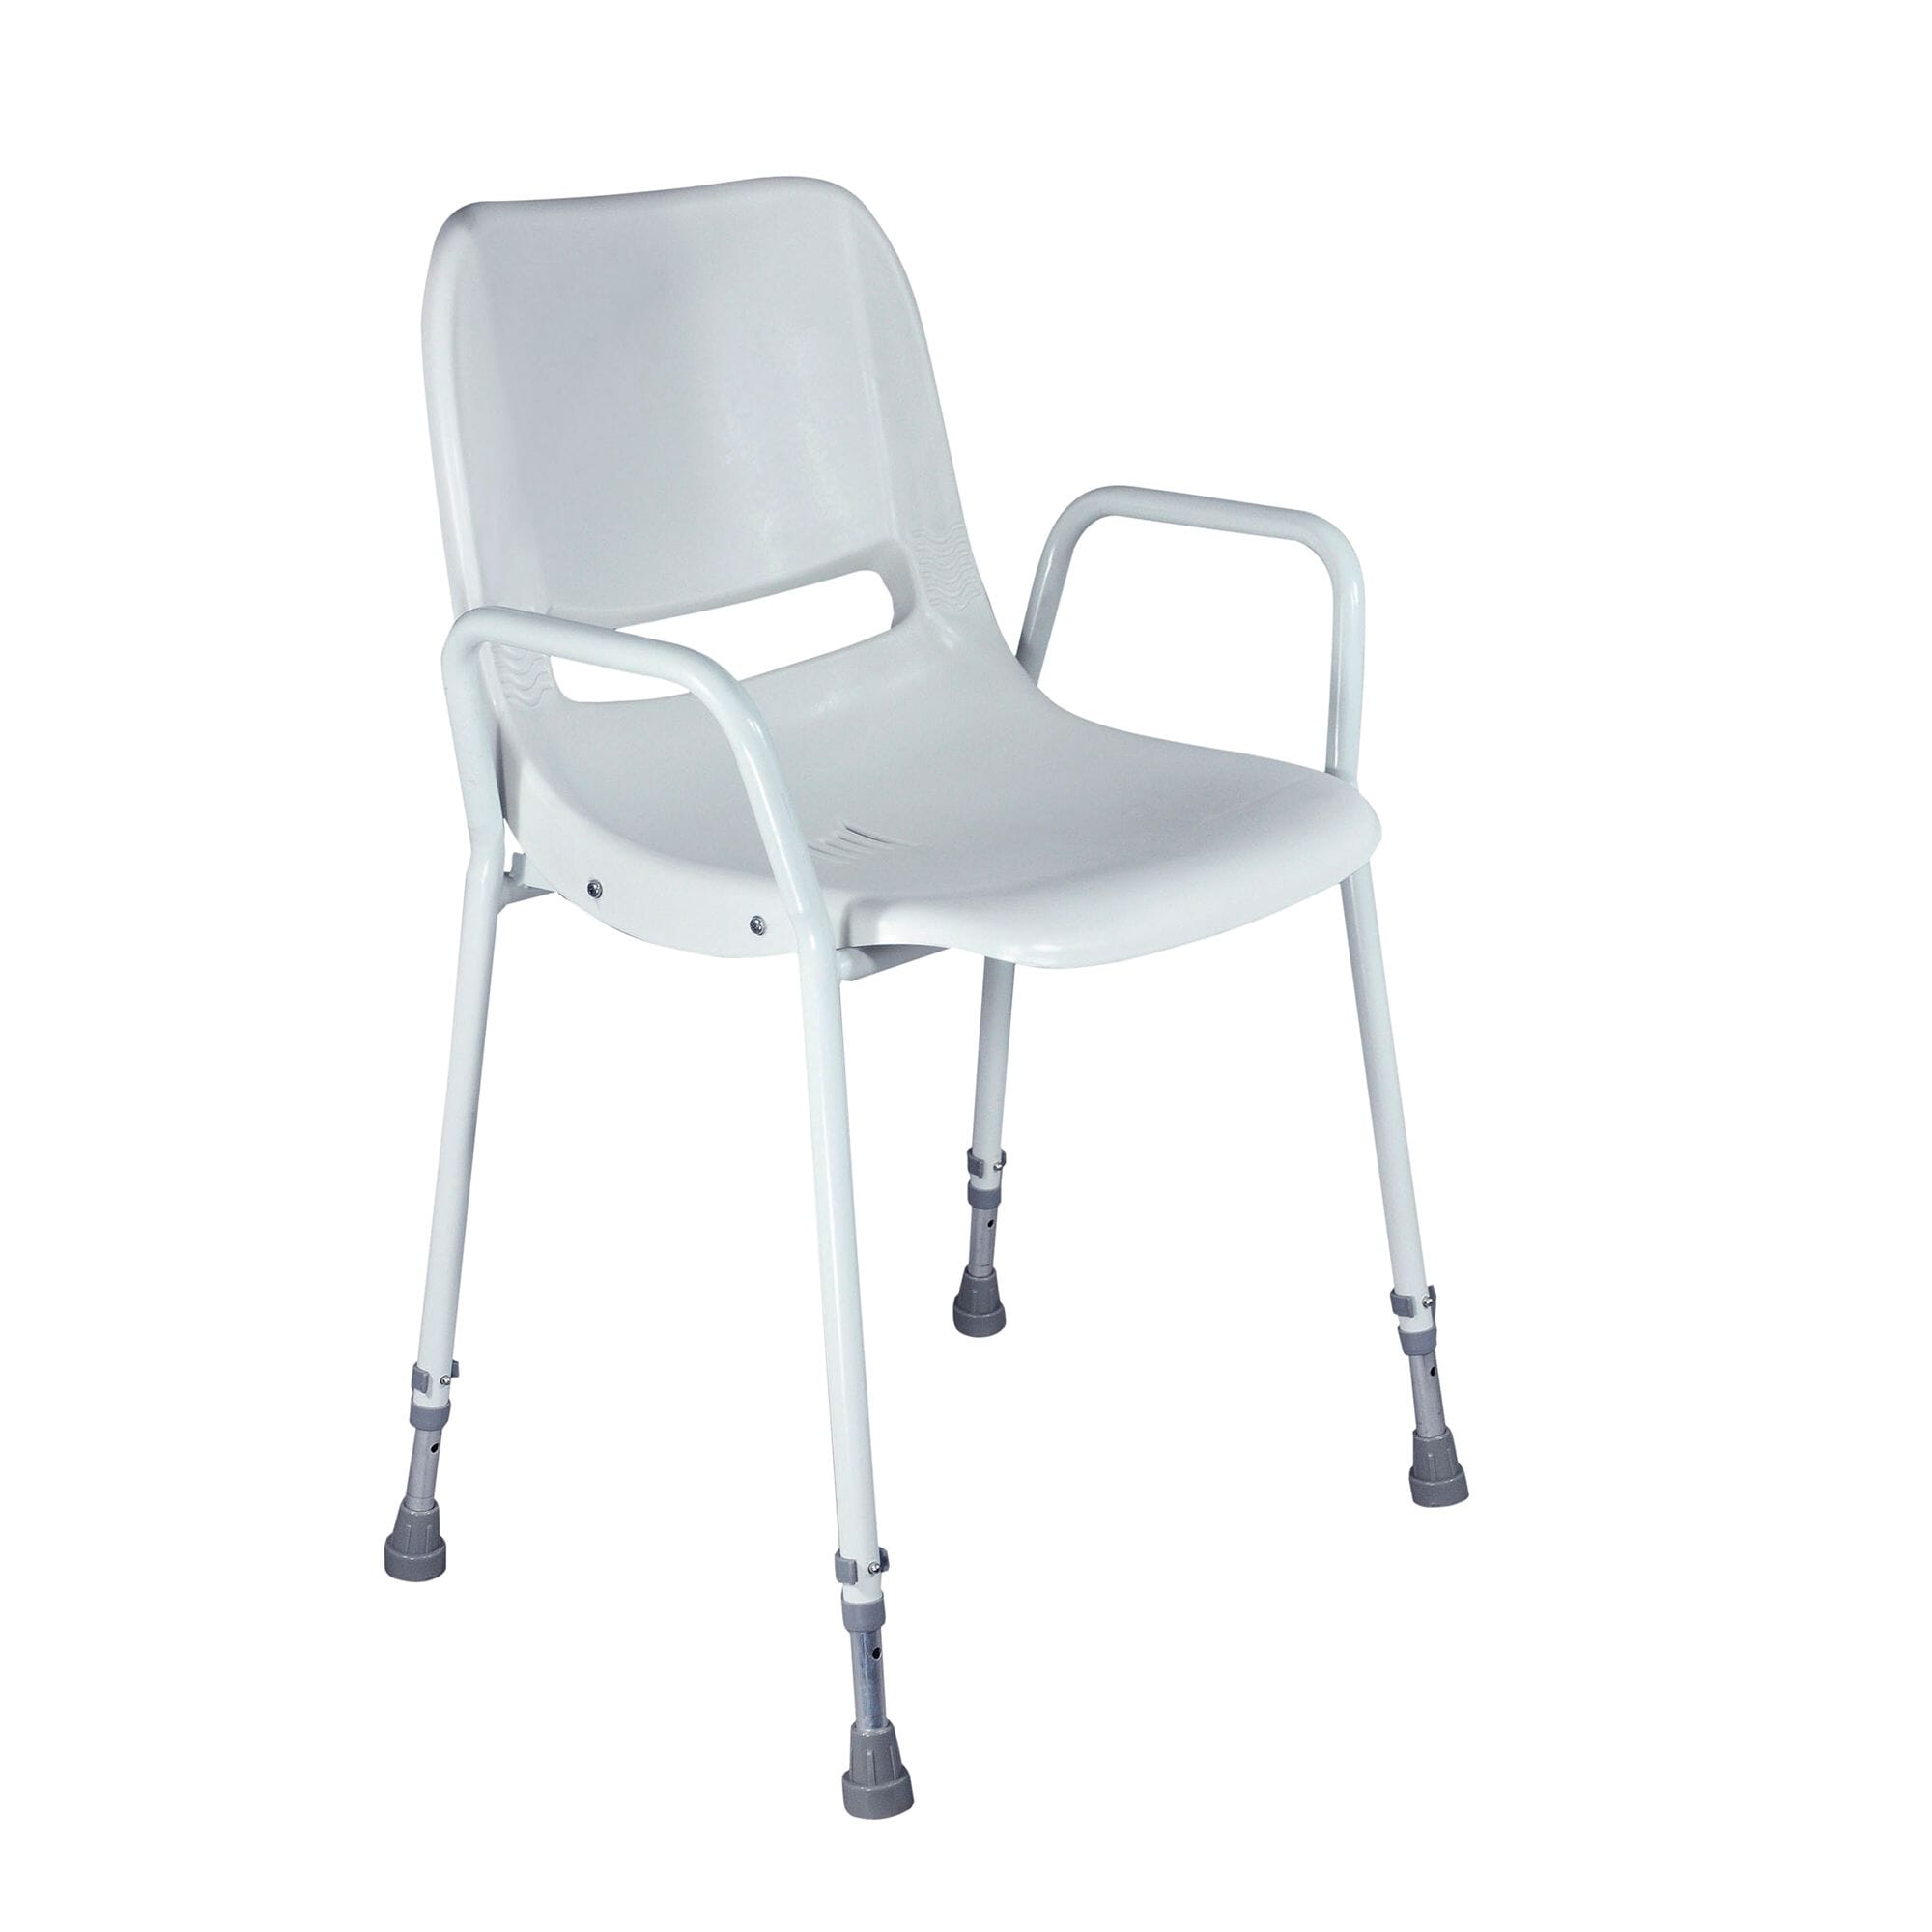 View Milton Stackable Portable Shower Chair Adjustable Height White information